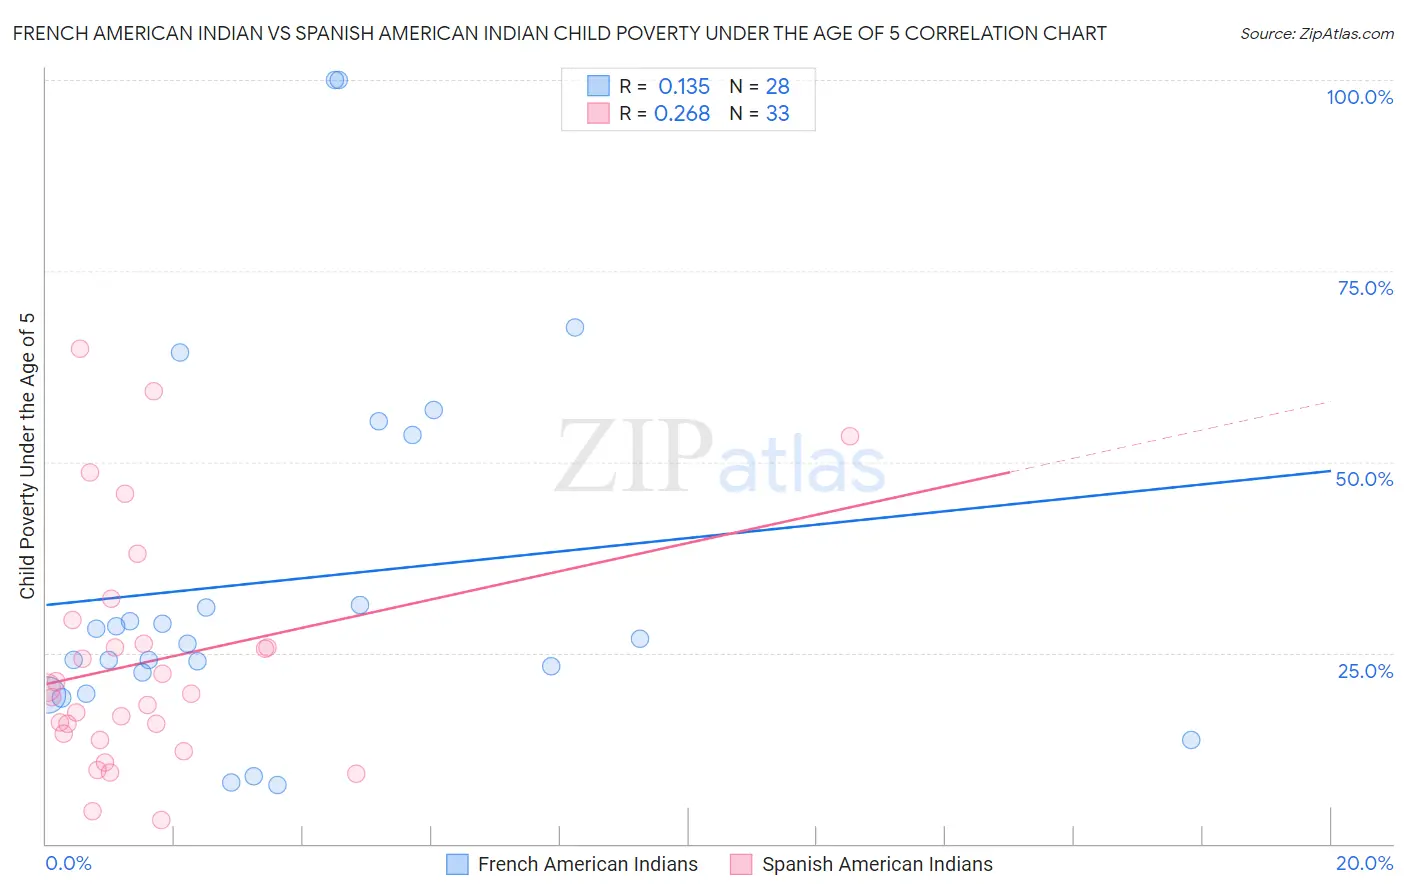 French American Indian vs Spanish American Indian Child Poverty Under the Age of 5